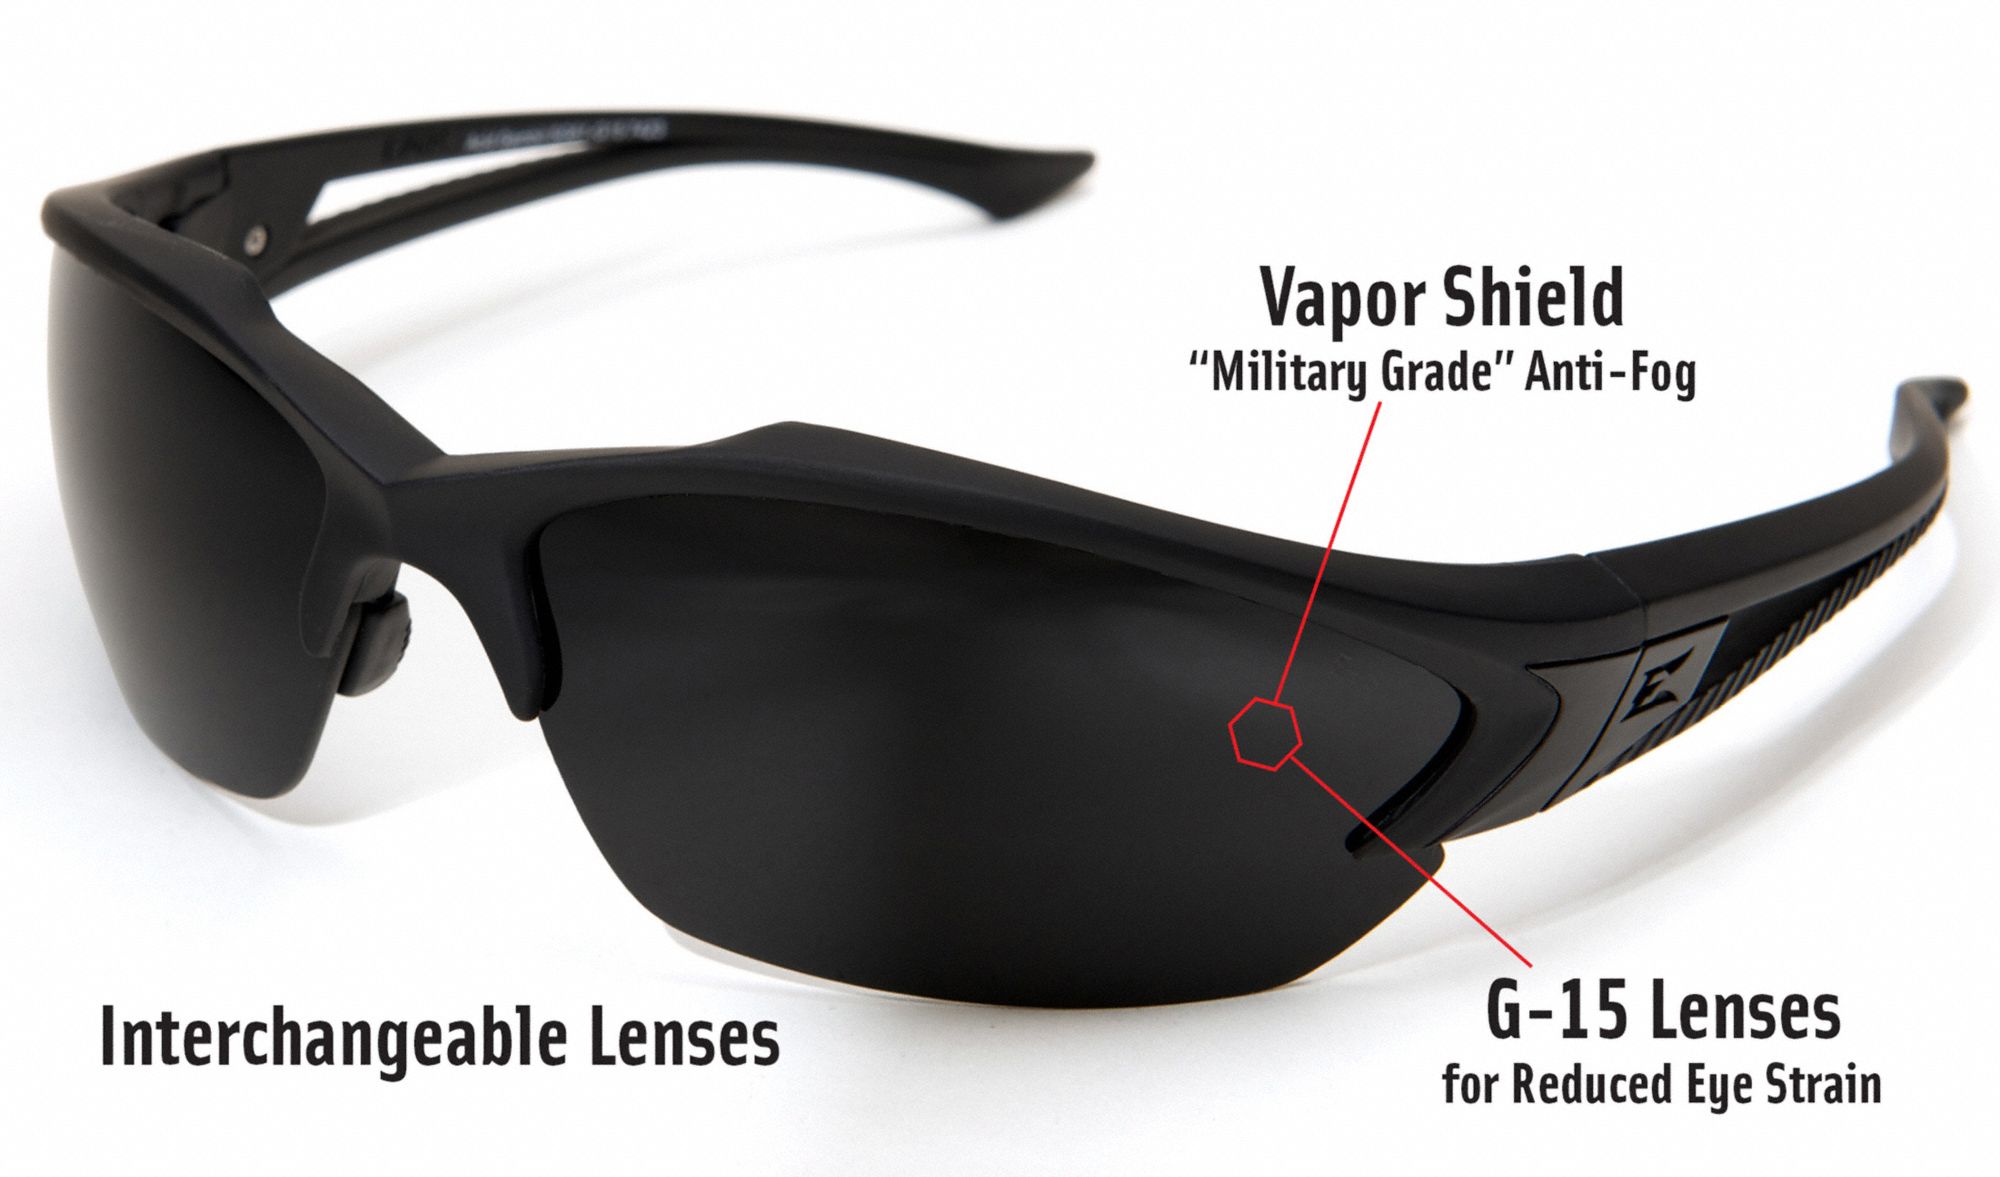 G-15 LENS EDGE TACTICAL EYEWEAR FALCON THIN TEMPLE with GASKET BLACK 